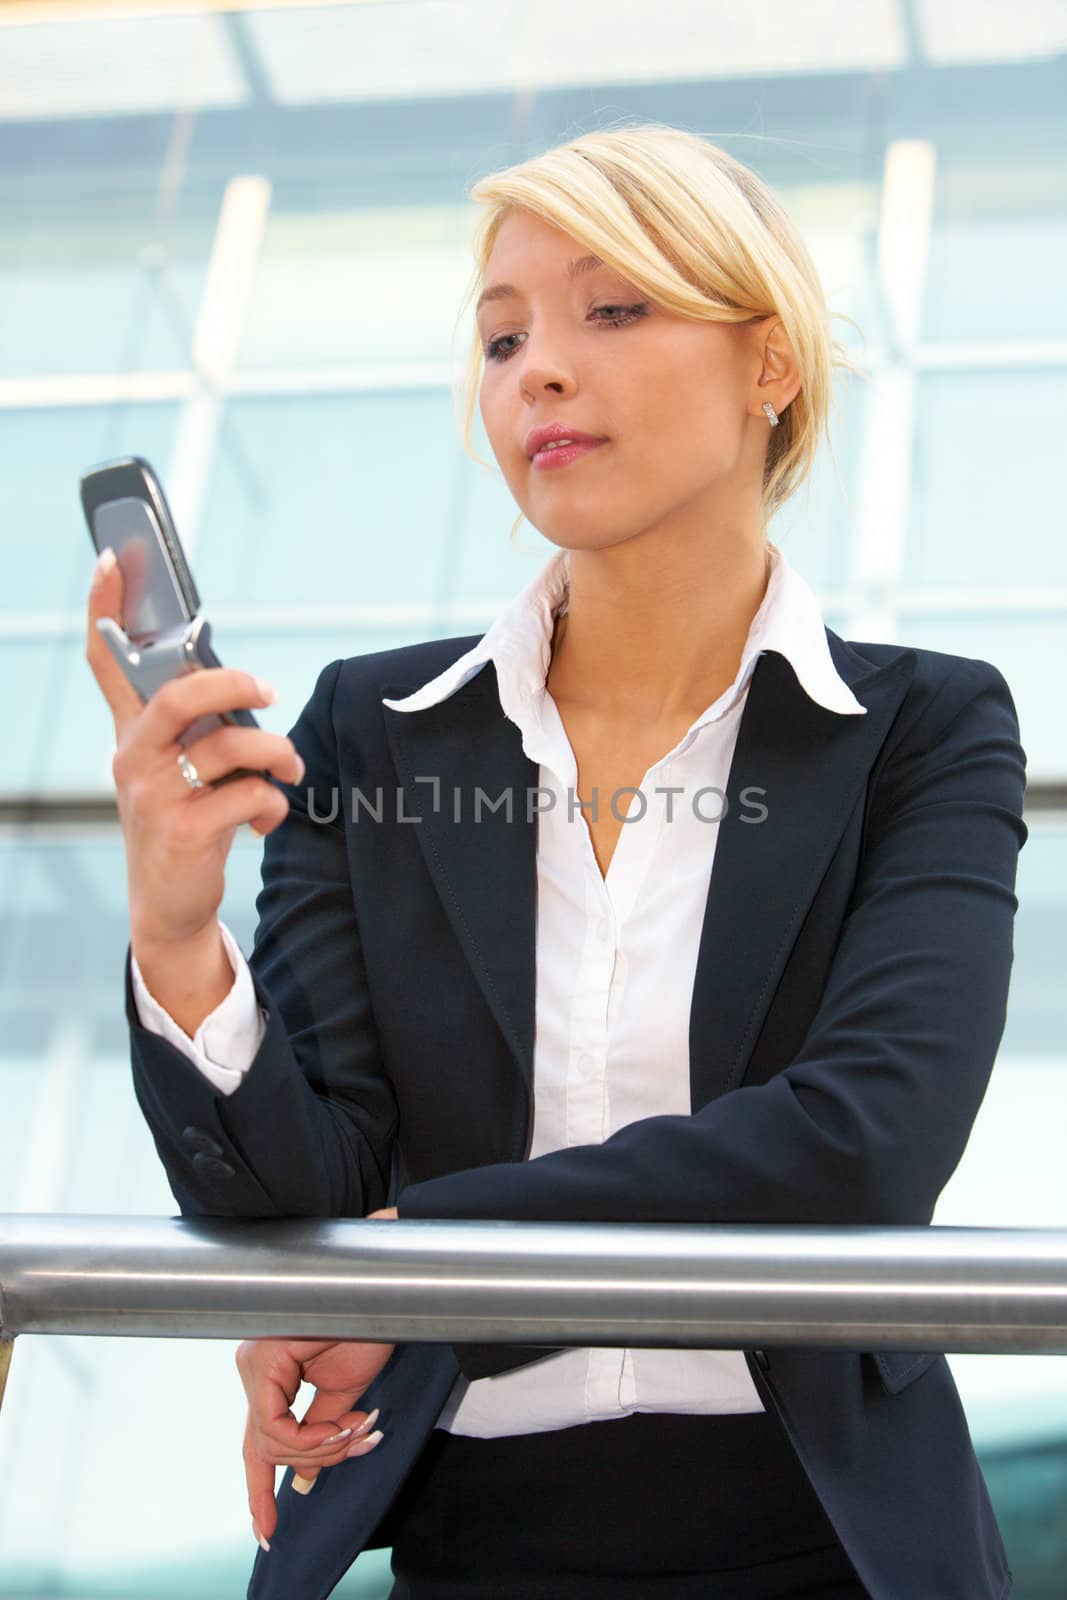 Businesswoman holding mobile phone, reading message